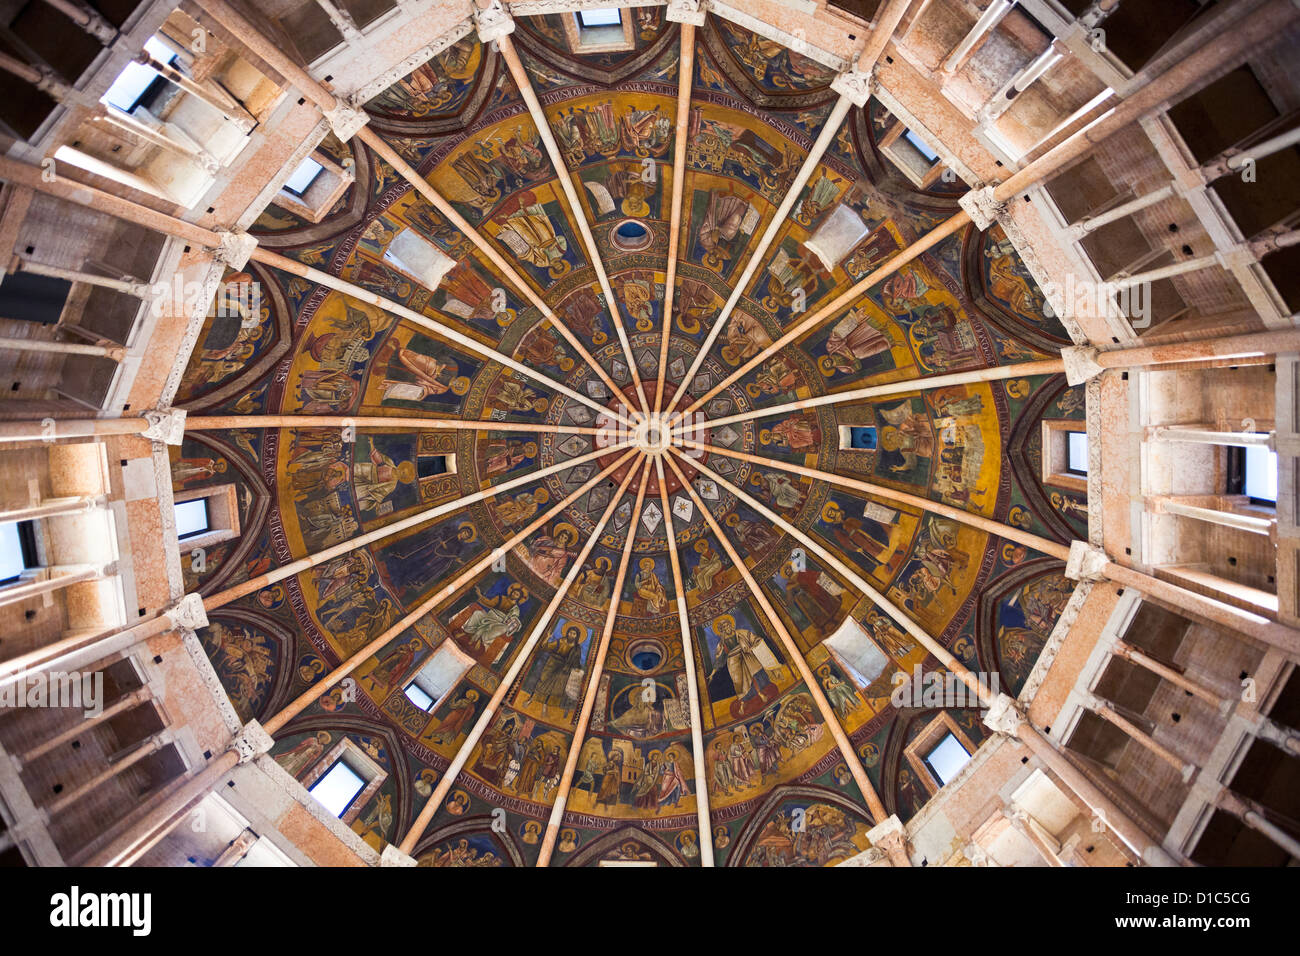 painted ceiling of baptistery parma italy Stock Photo